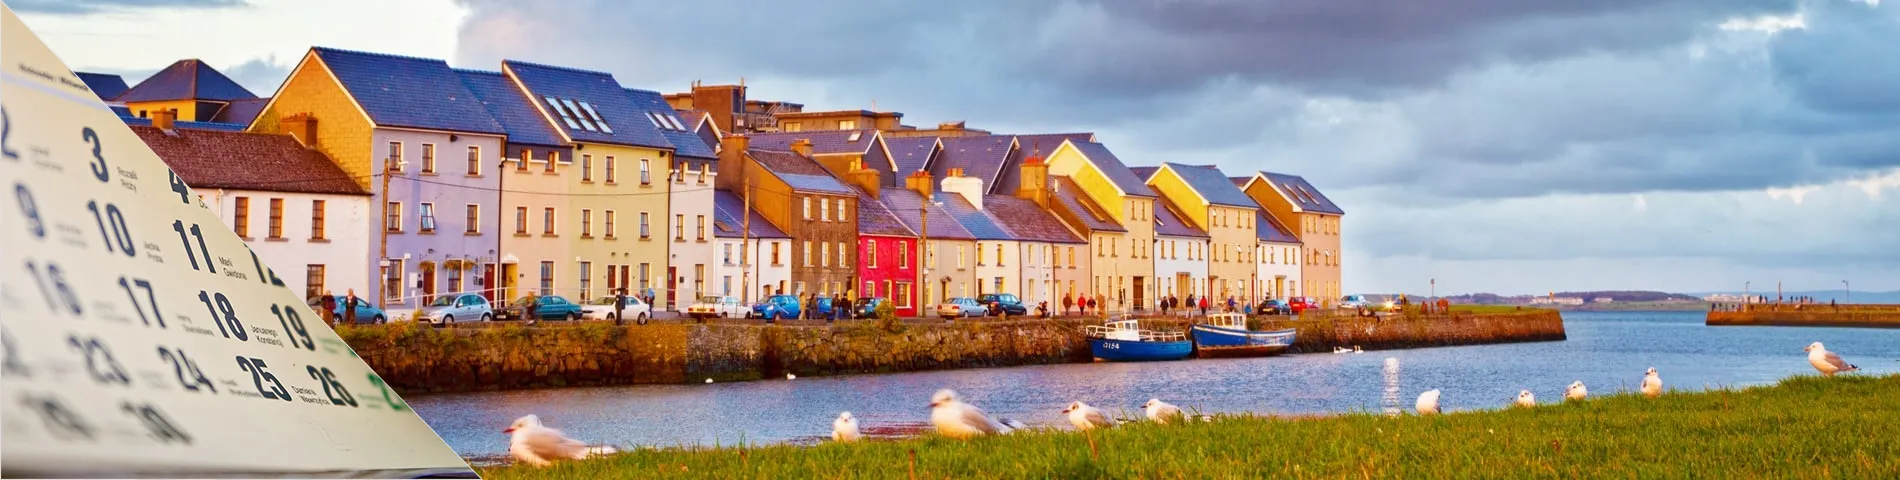 Galway - Inglese annuale 